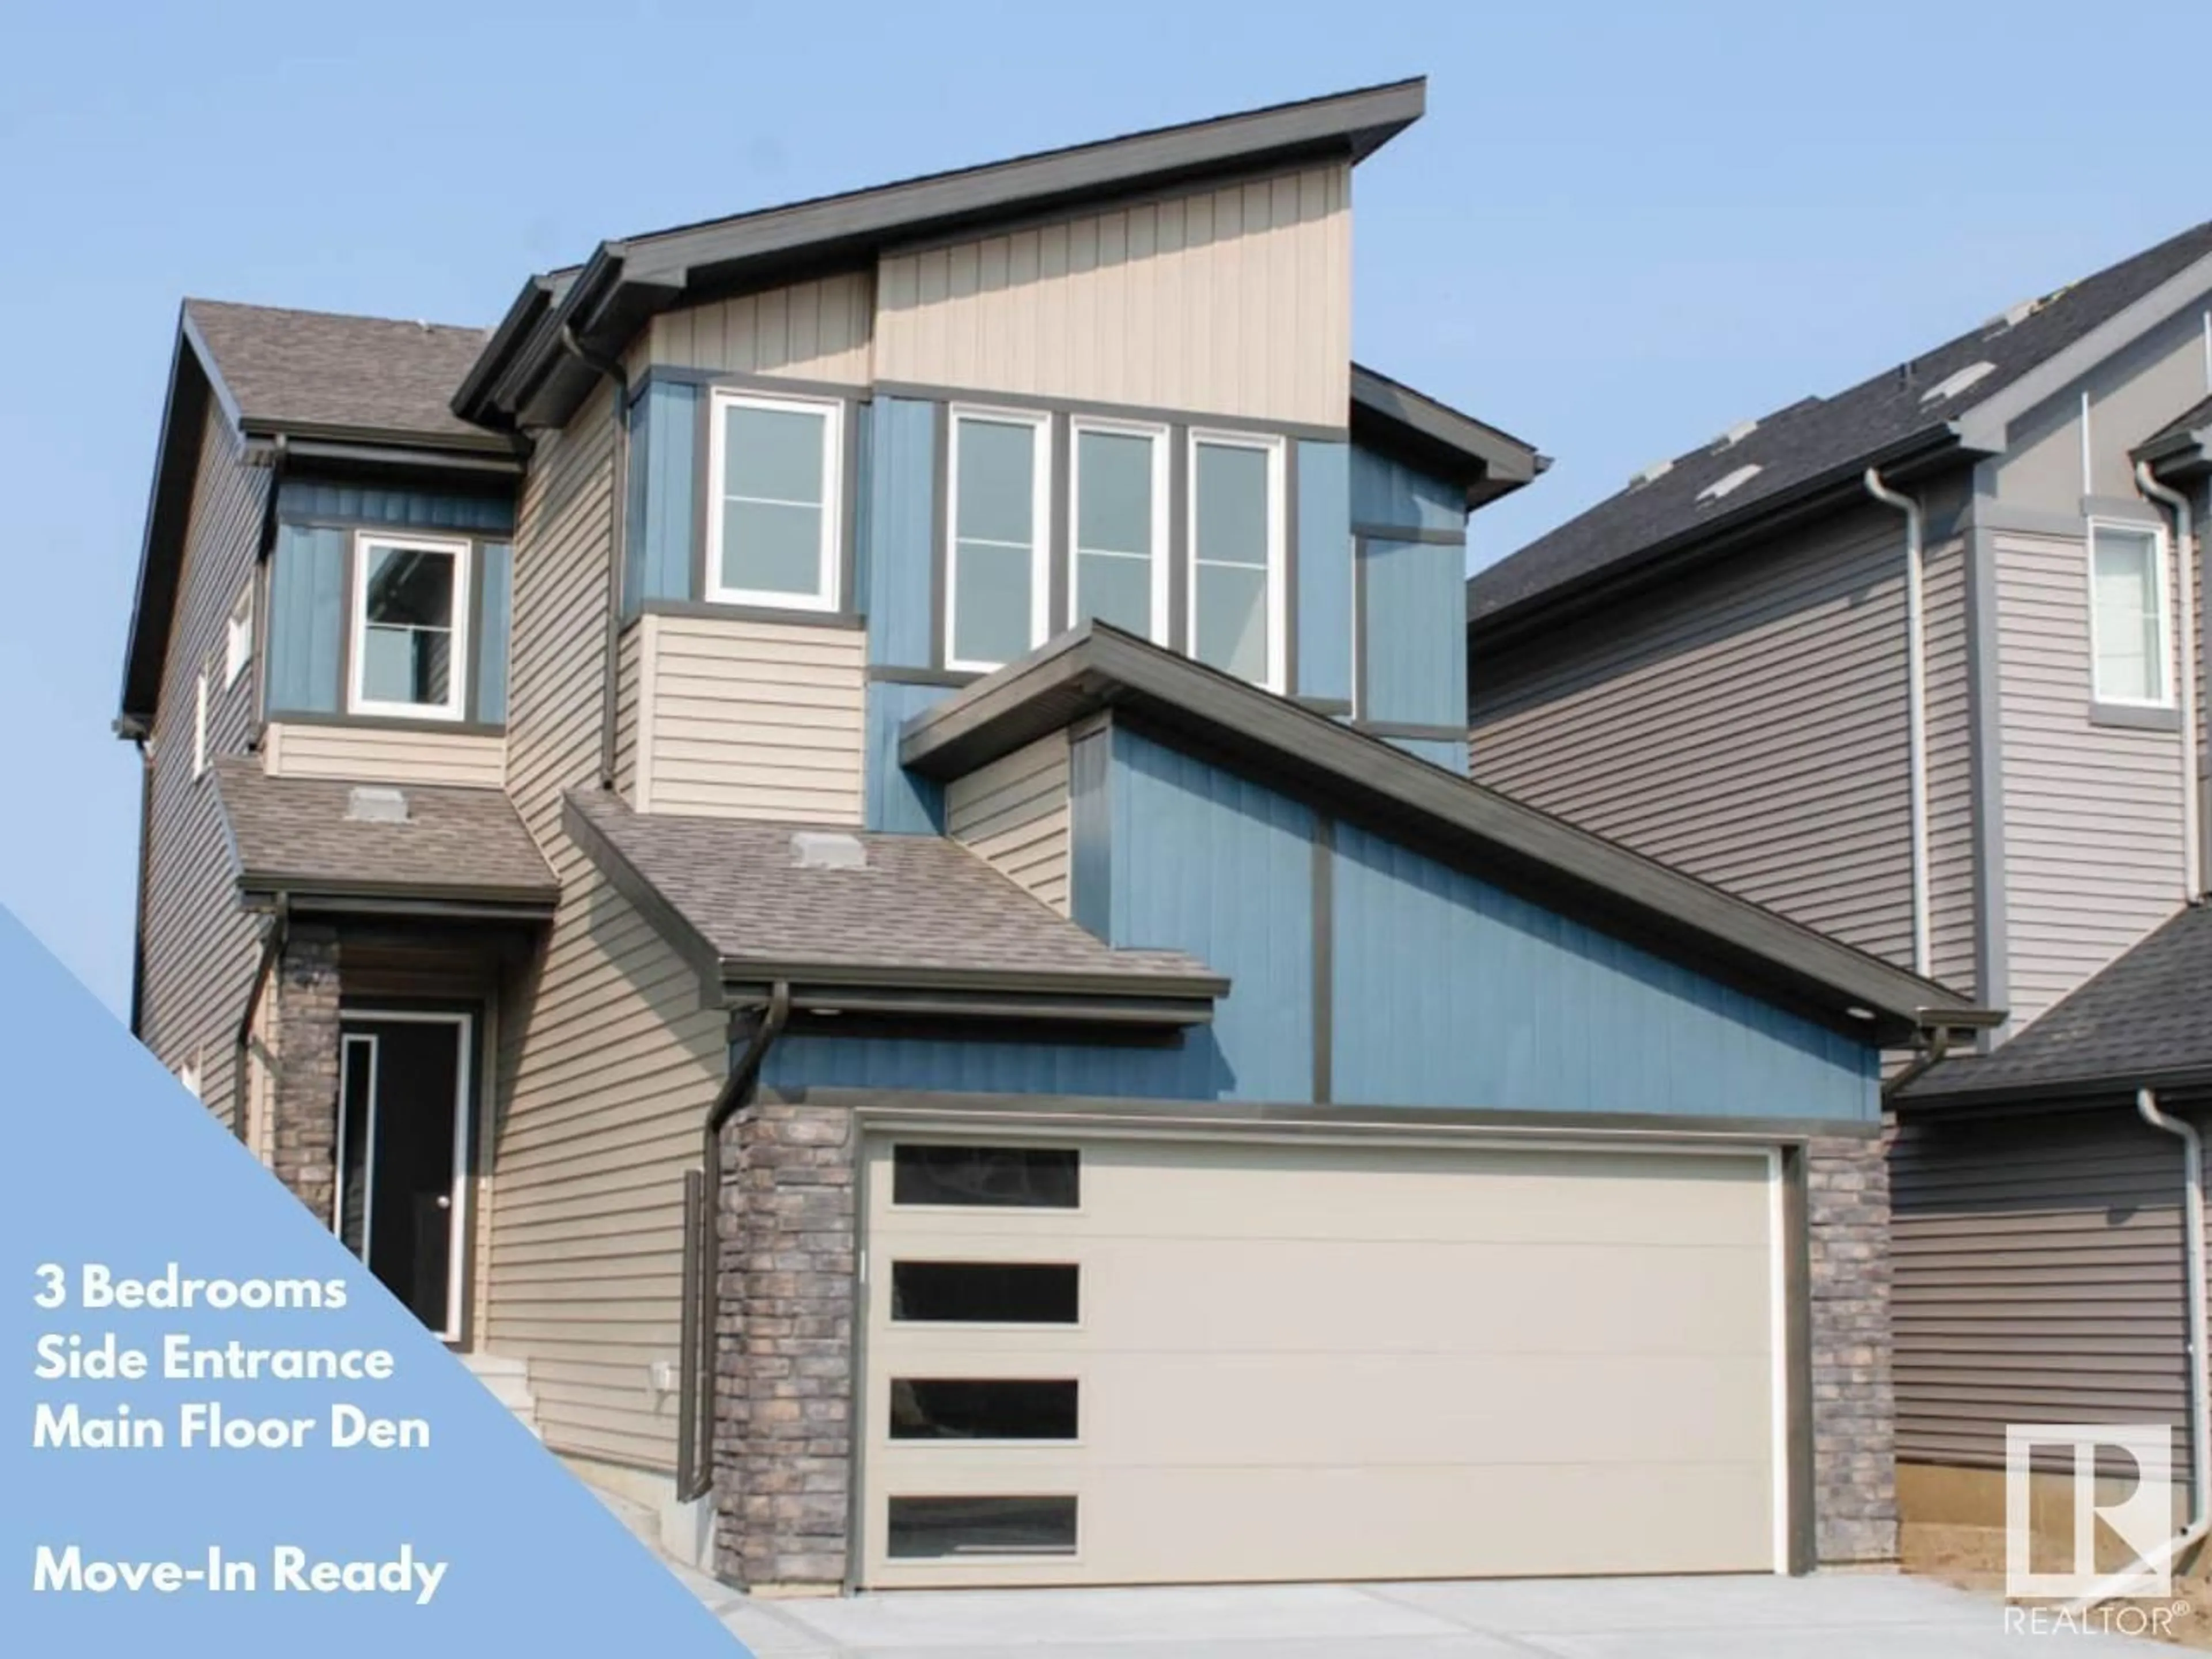 Home with vinyl exterior material for 9822 225A ST NW, Edmonton Alberta T5T7G7